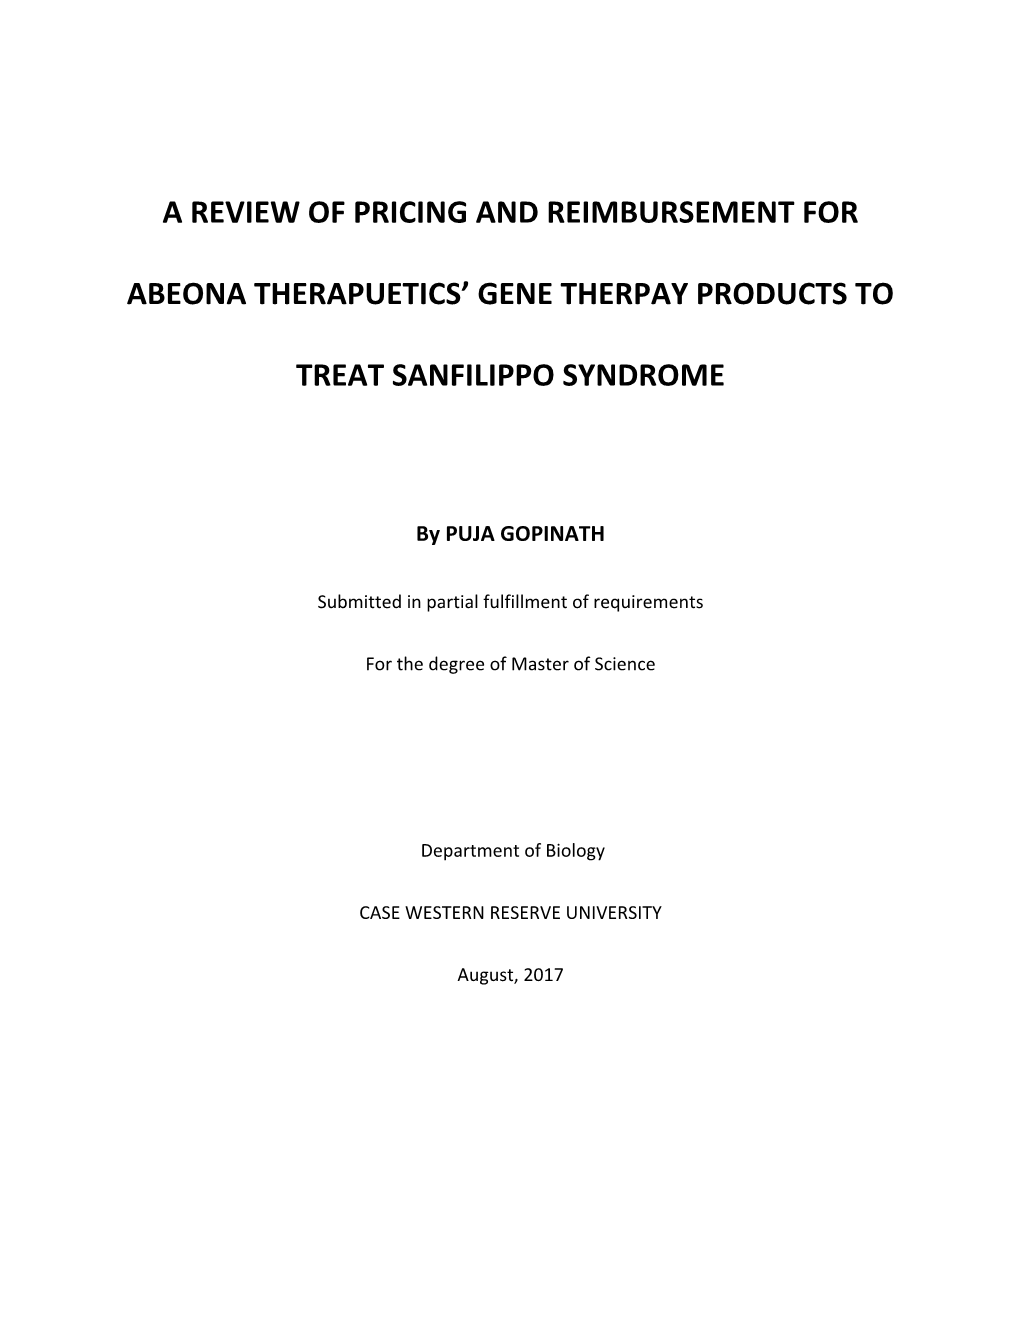 A Review of Pricing and Reimbursement for Abeona Therapuetics' Gene Therpay Products to Treat Sanfilippo Syndrome